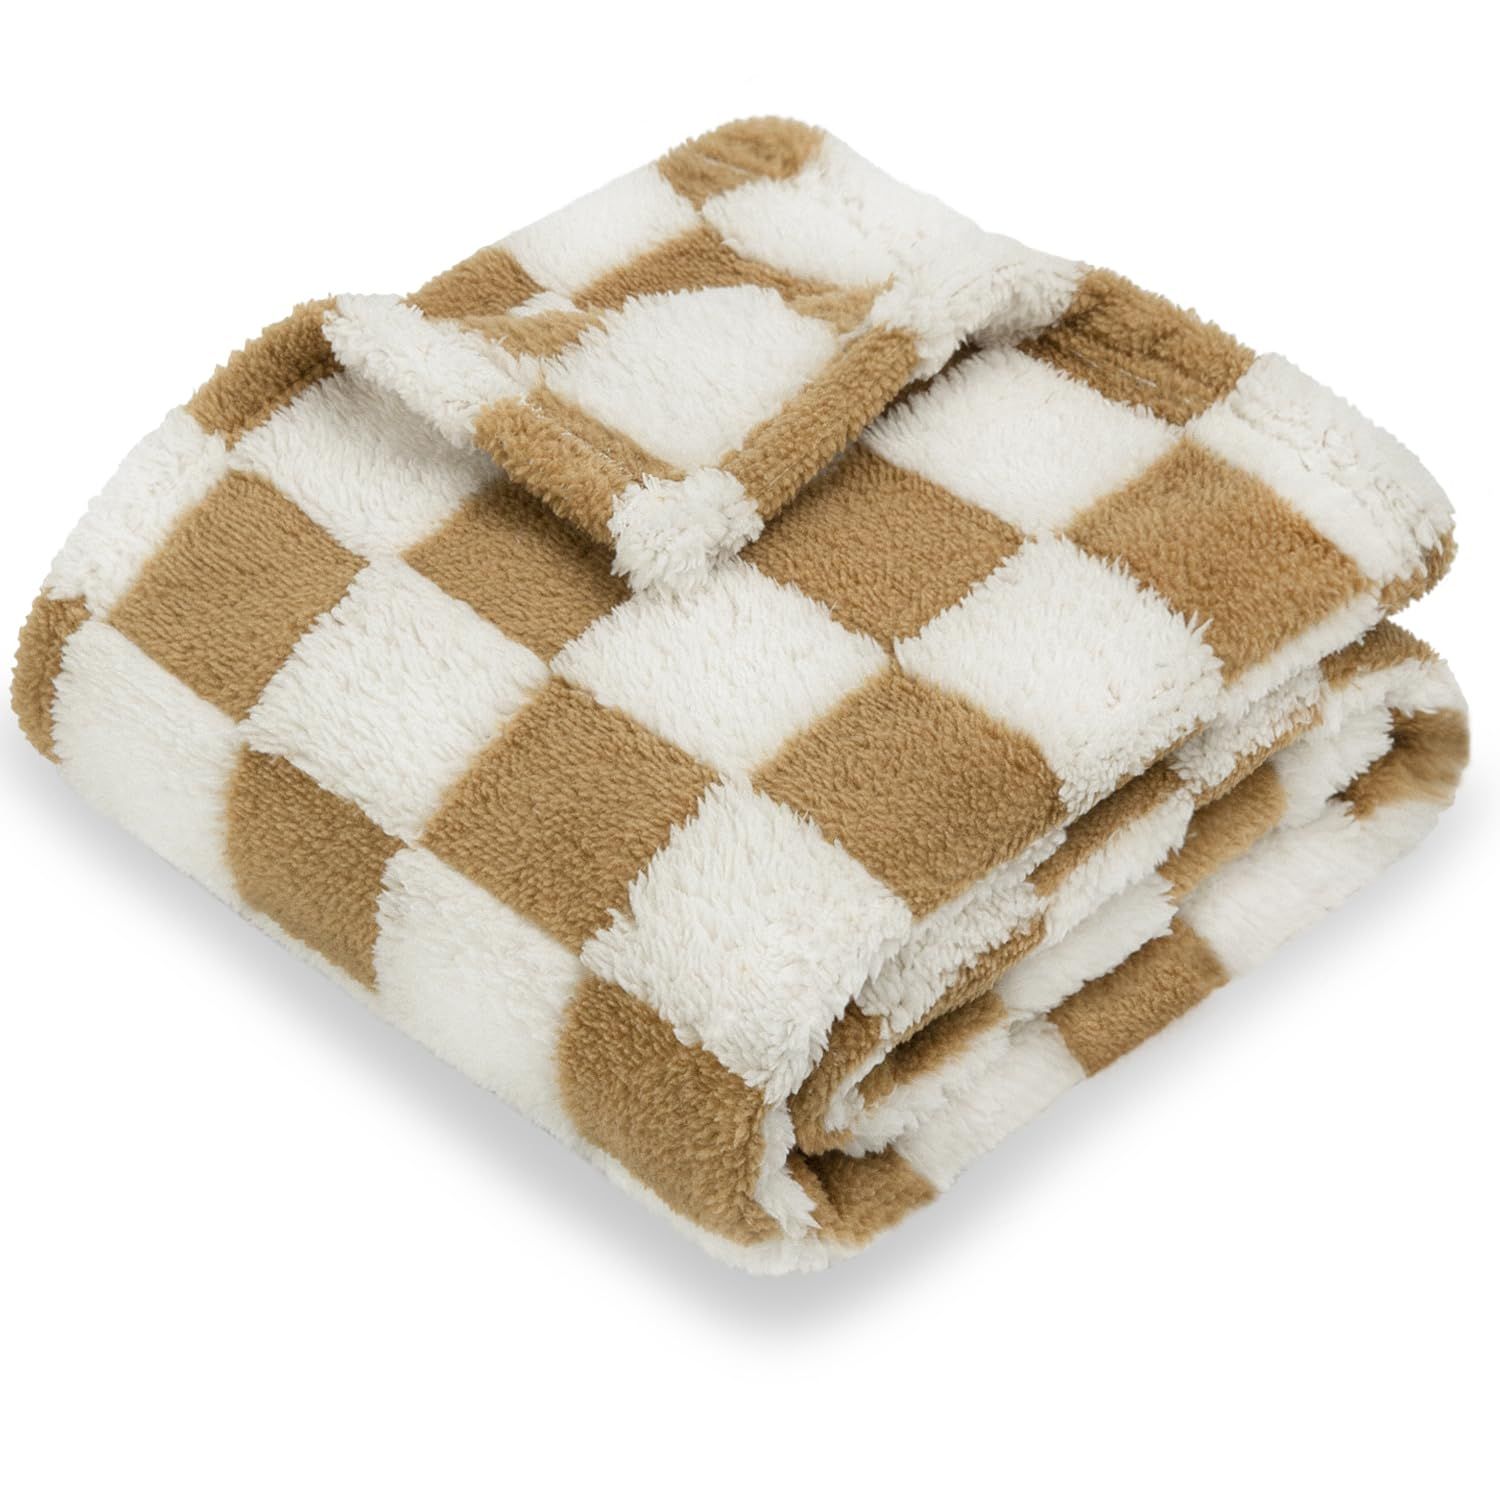 HOMRITAR Super Soft Baby Blanket for Boys Girls Warm Cozy Reversible Checkerboard Toddlers Blanket, Fluffy Fuzzy Plush Lightweight Bed Blanket with Chessboard Grid Design 380GSM Khaki 30 x 40 Inch | Amazon (US)